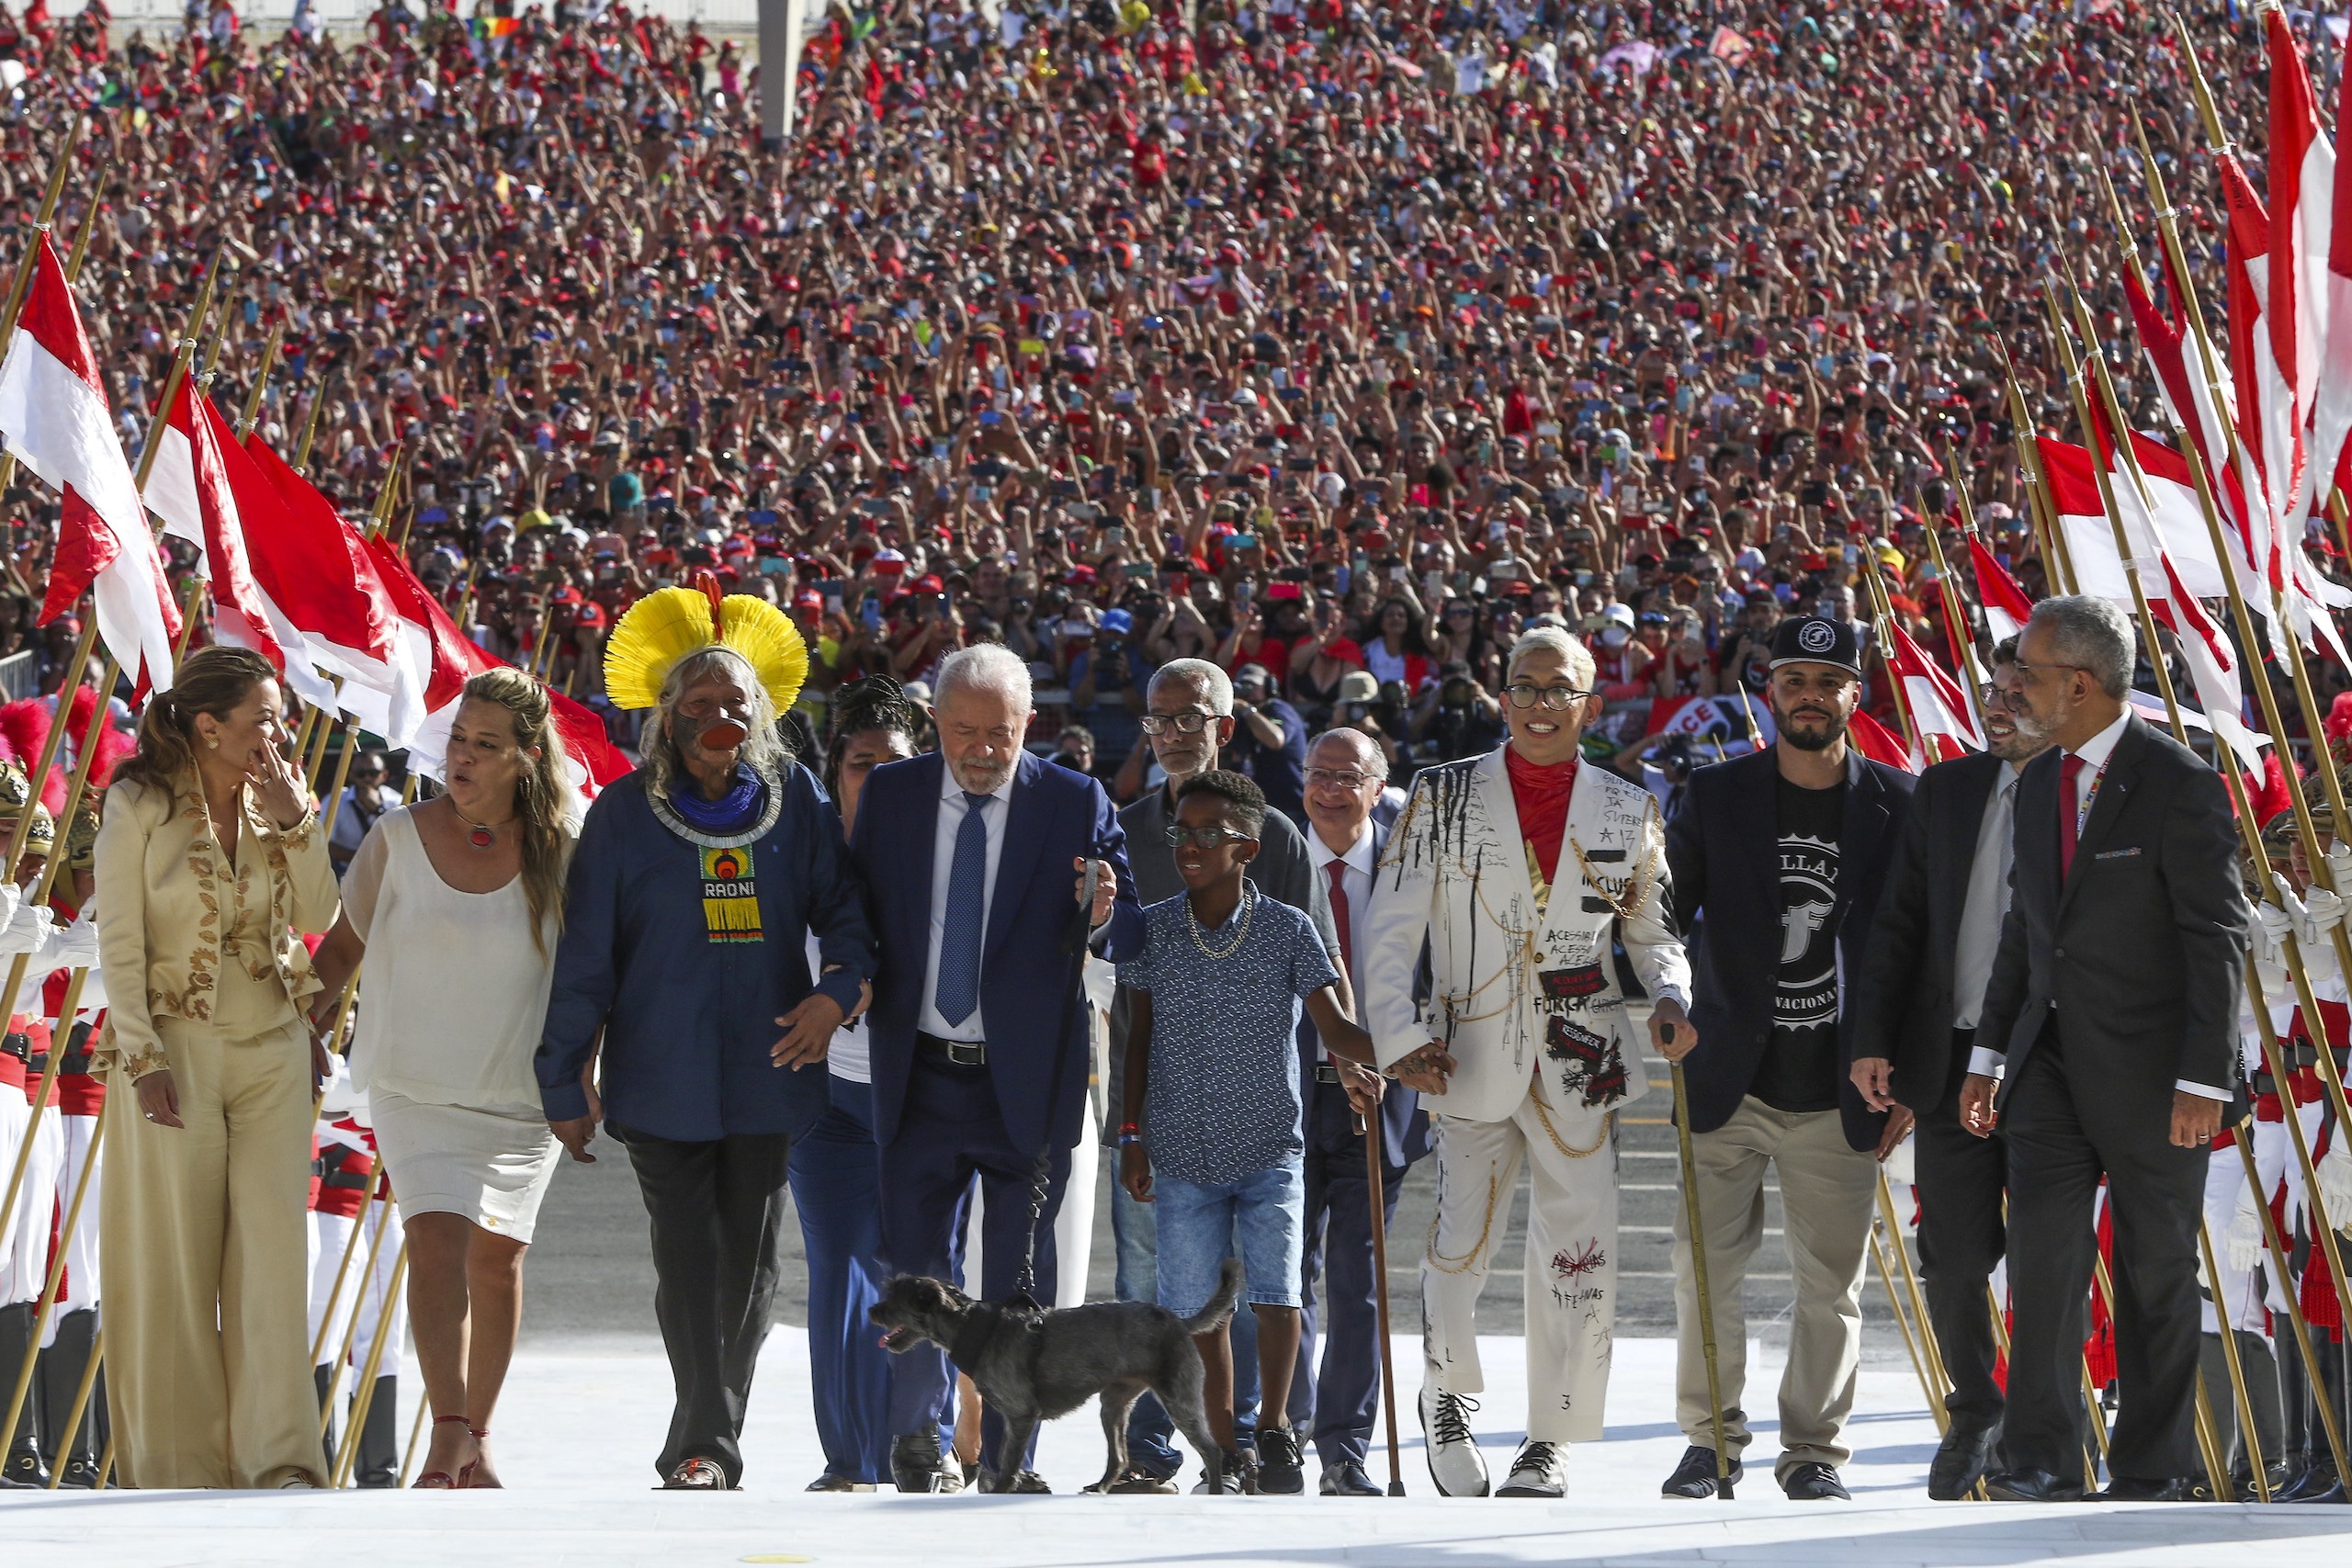 Brazil president Lula with a group of people in front of a large crowd